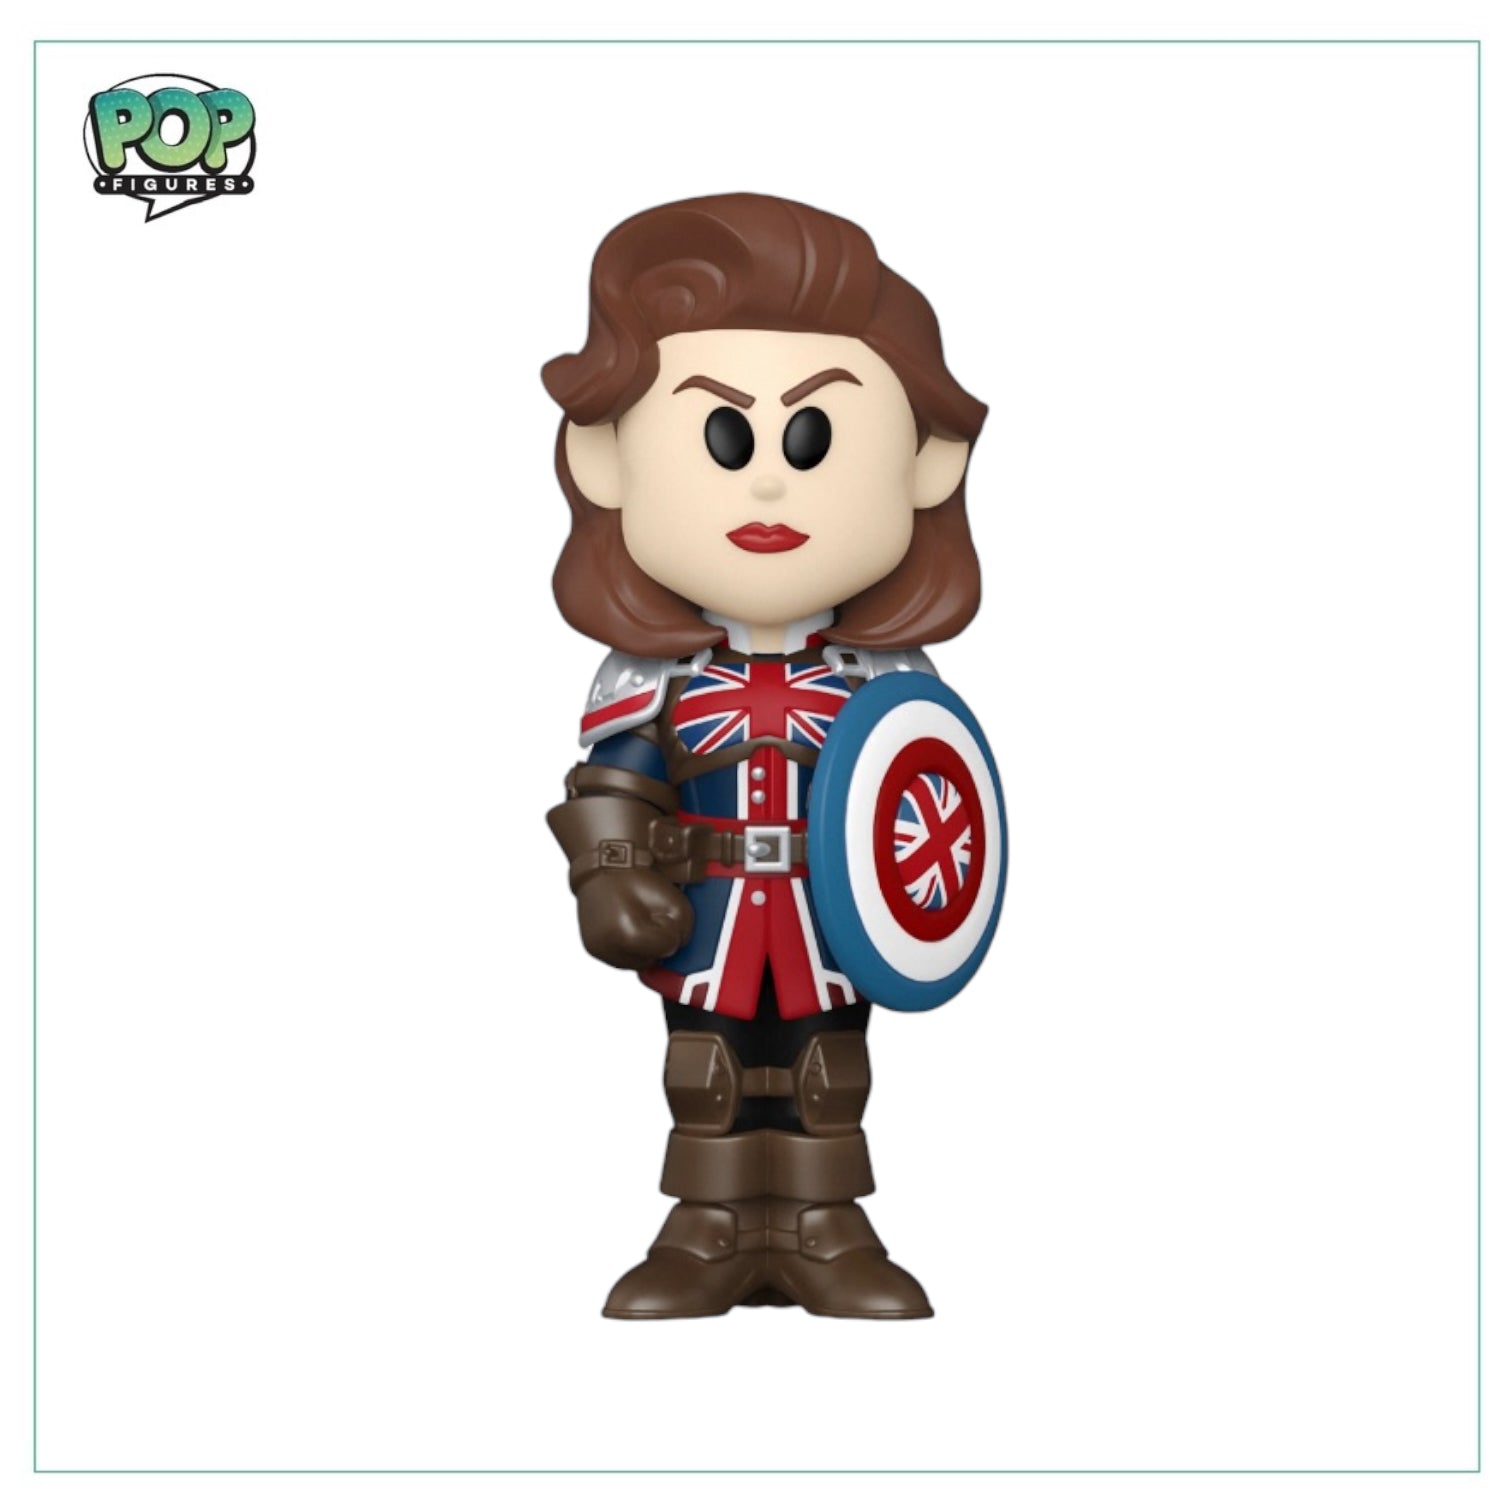 Captain Carter Funko Soda Vinyl Figure! - Marvel - What If...? - Chance Of Chase